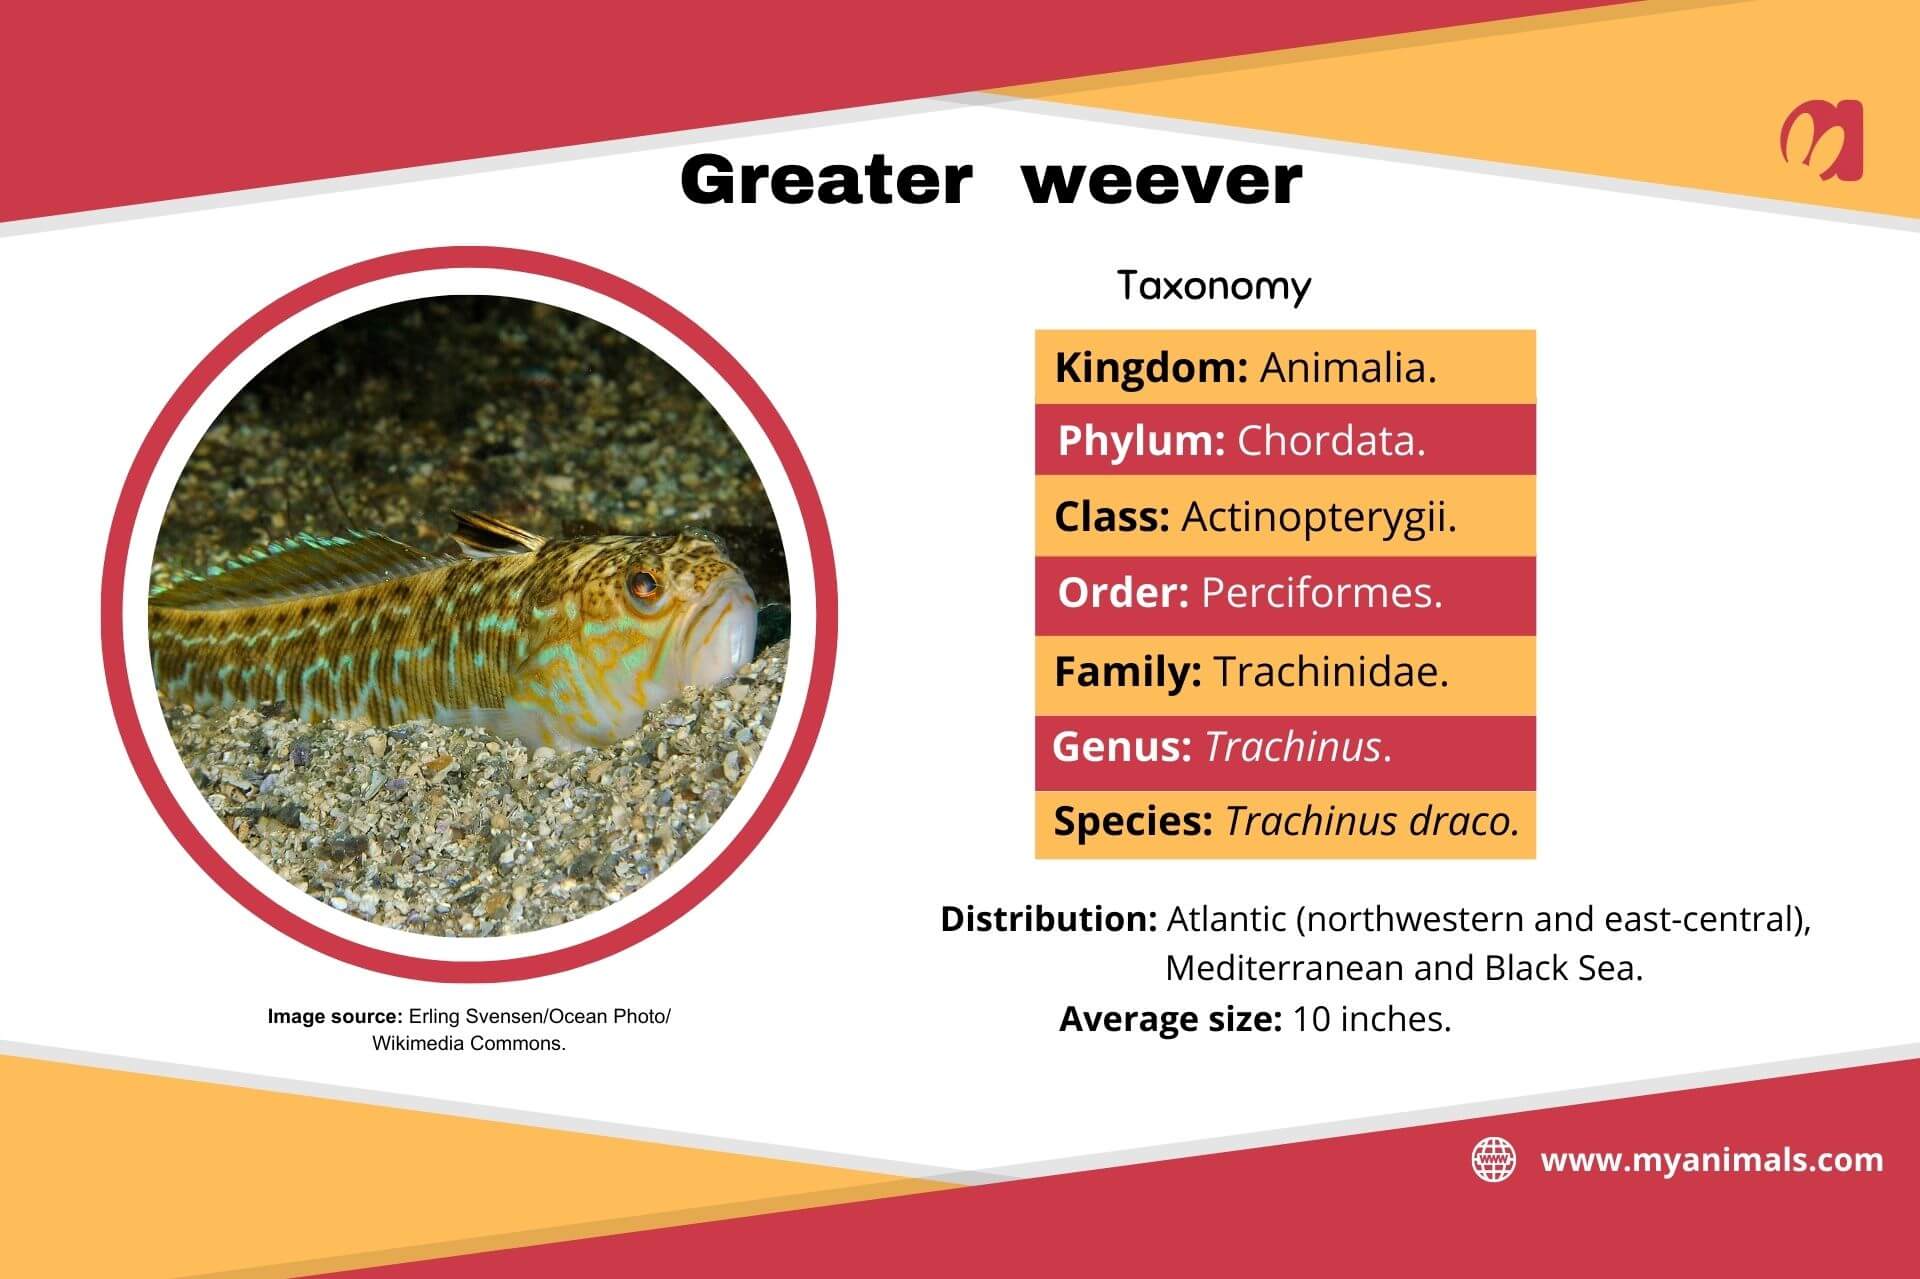 Information on the greater weever.